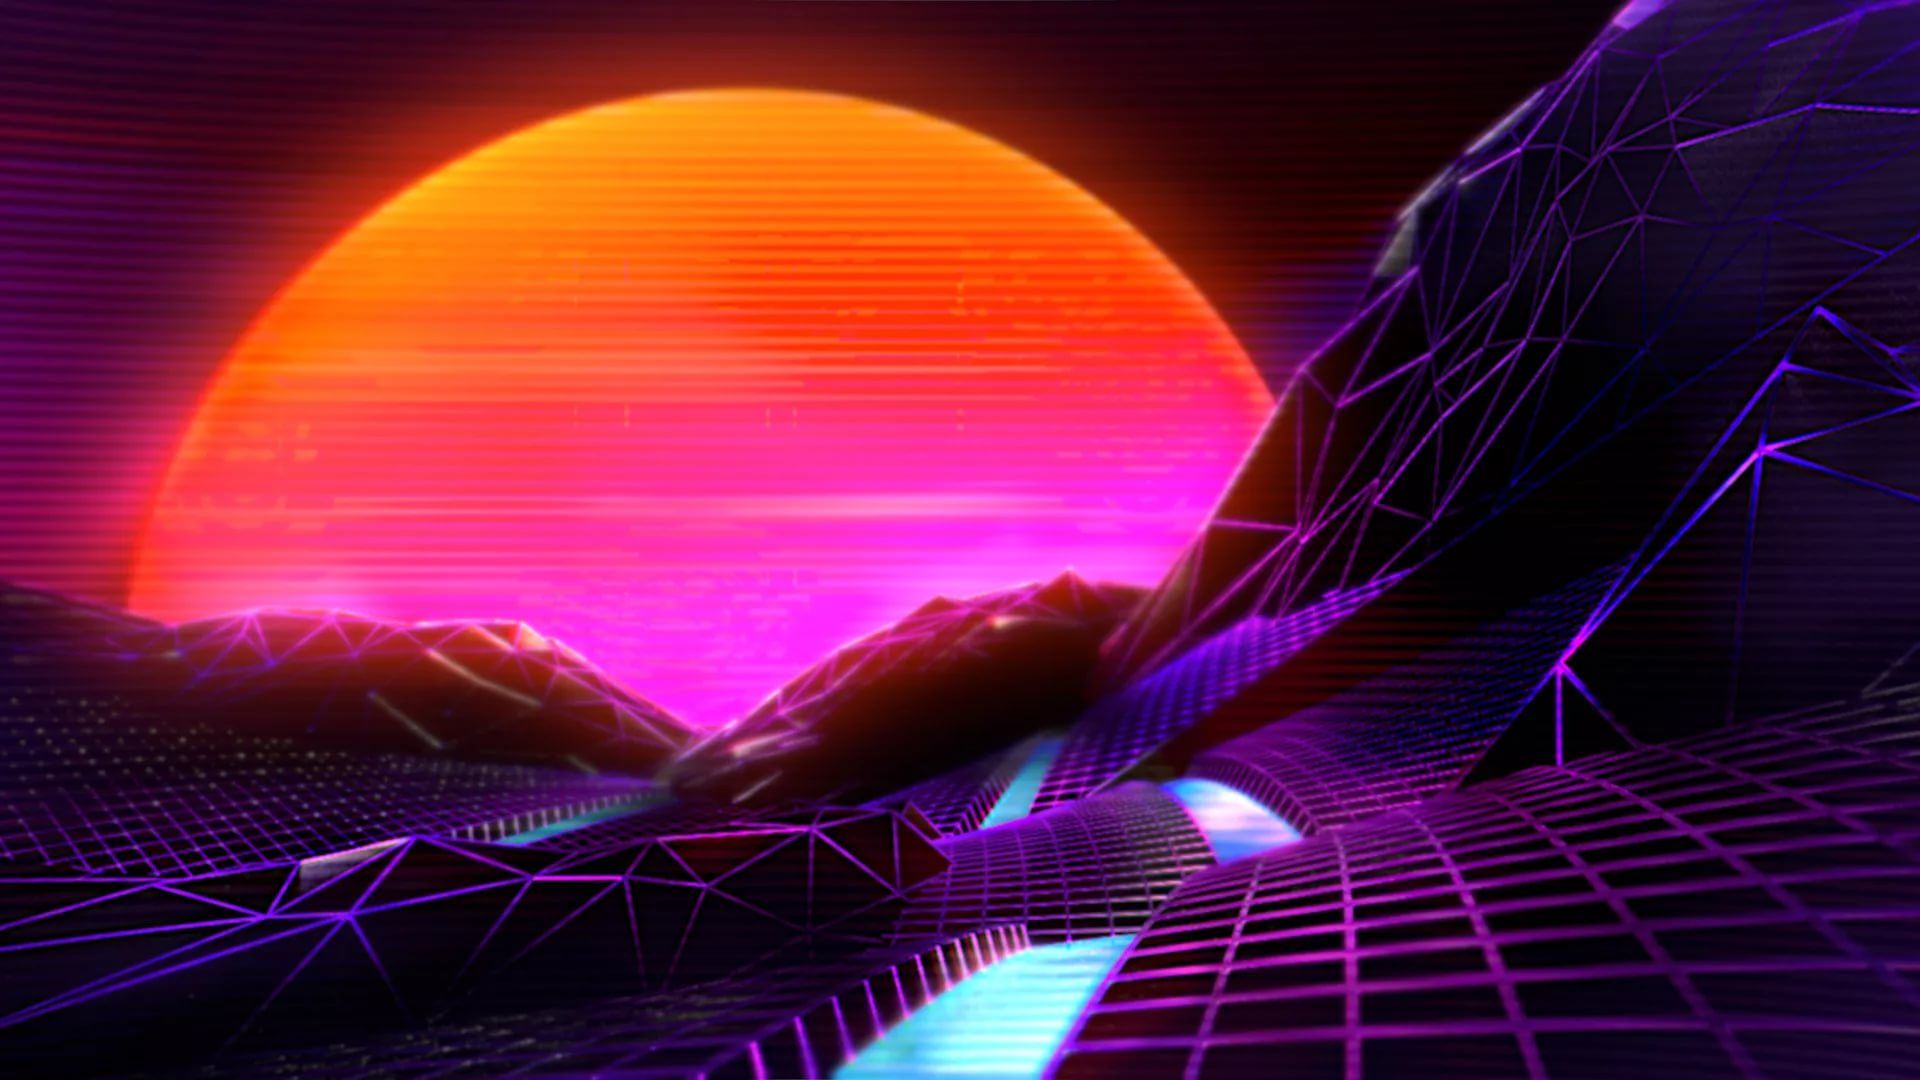 Synthwave Full Hd Wallpaper For Laptop - Hd Synthwave - HD Wallpaper 